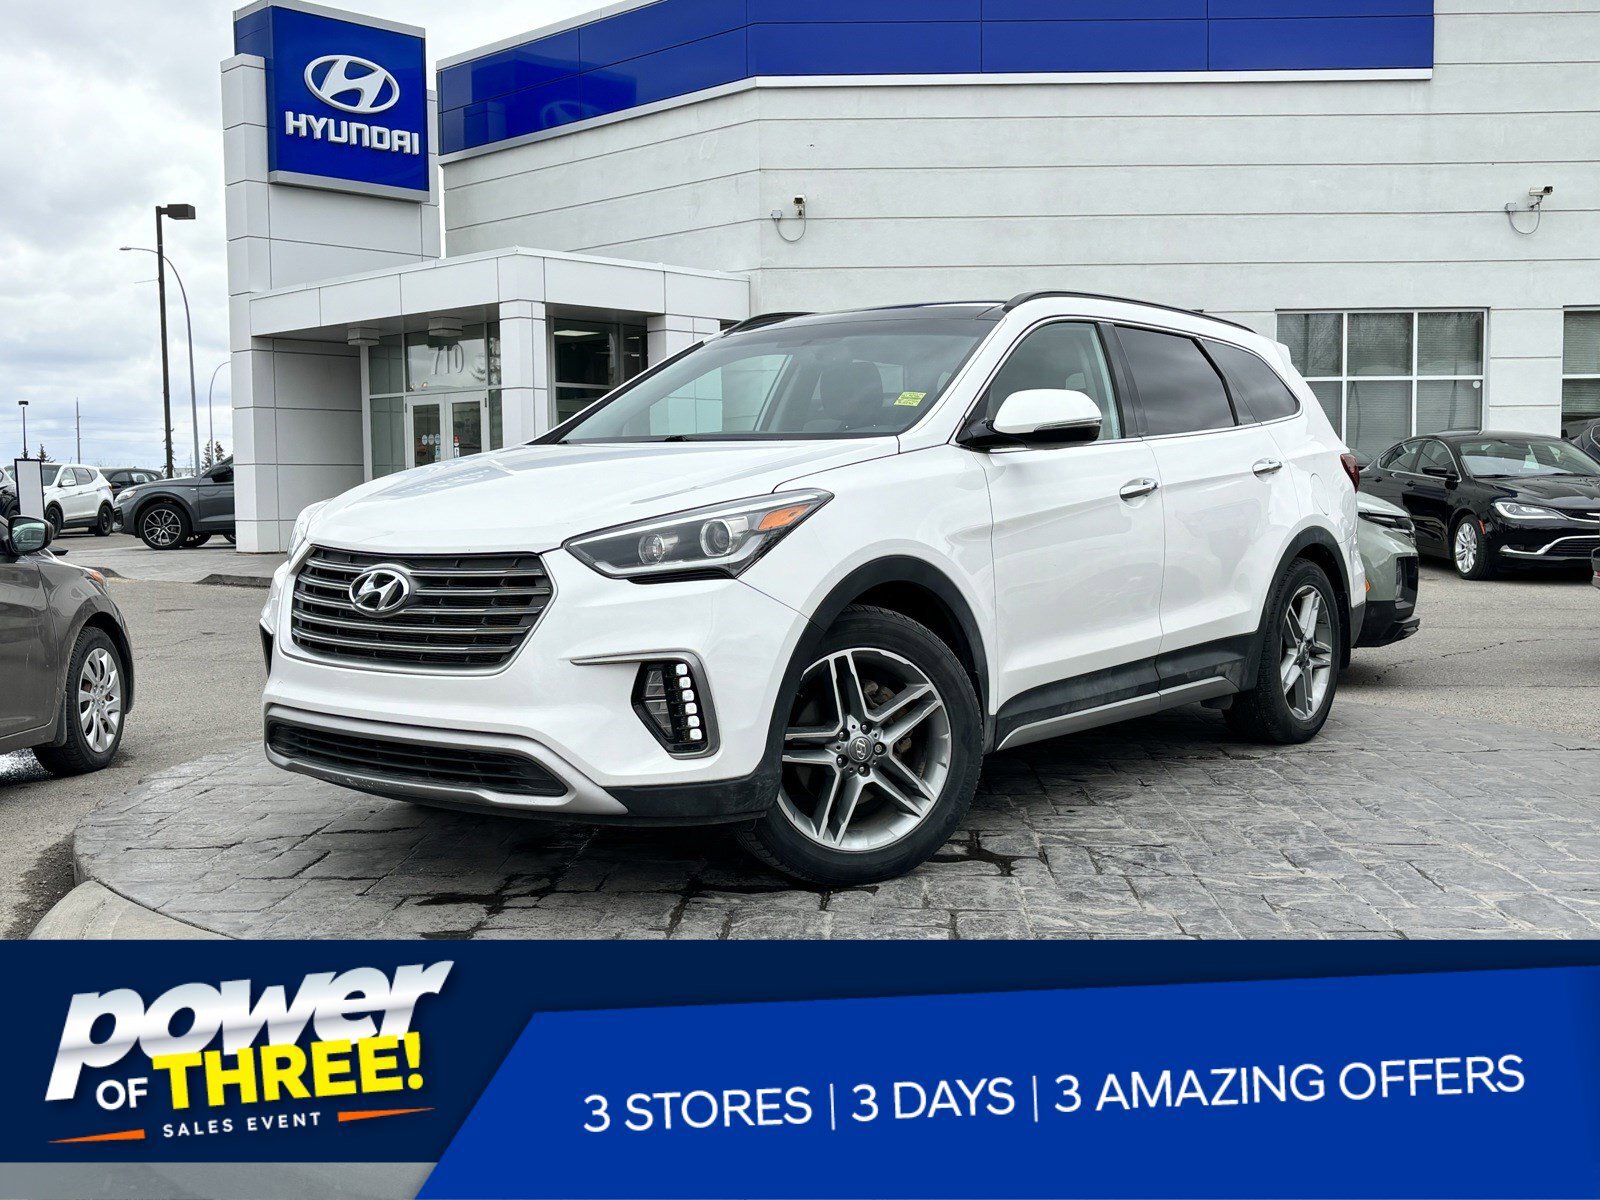 2017 Hyundai Santa Fe XL Limited - 7 Pass, No Accidents, One Owner, AWD, Le